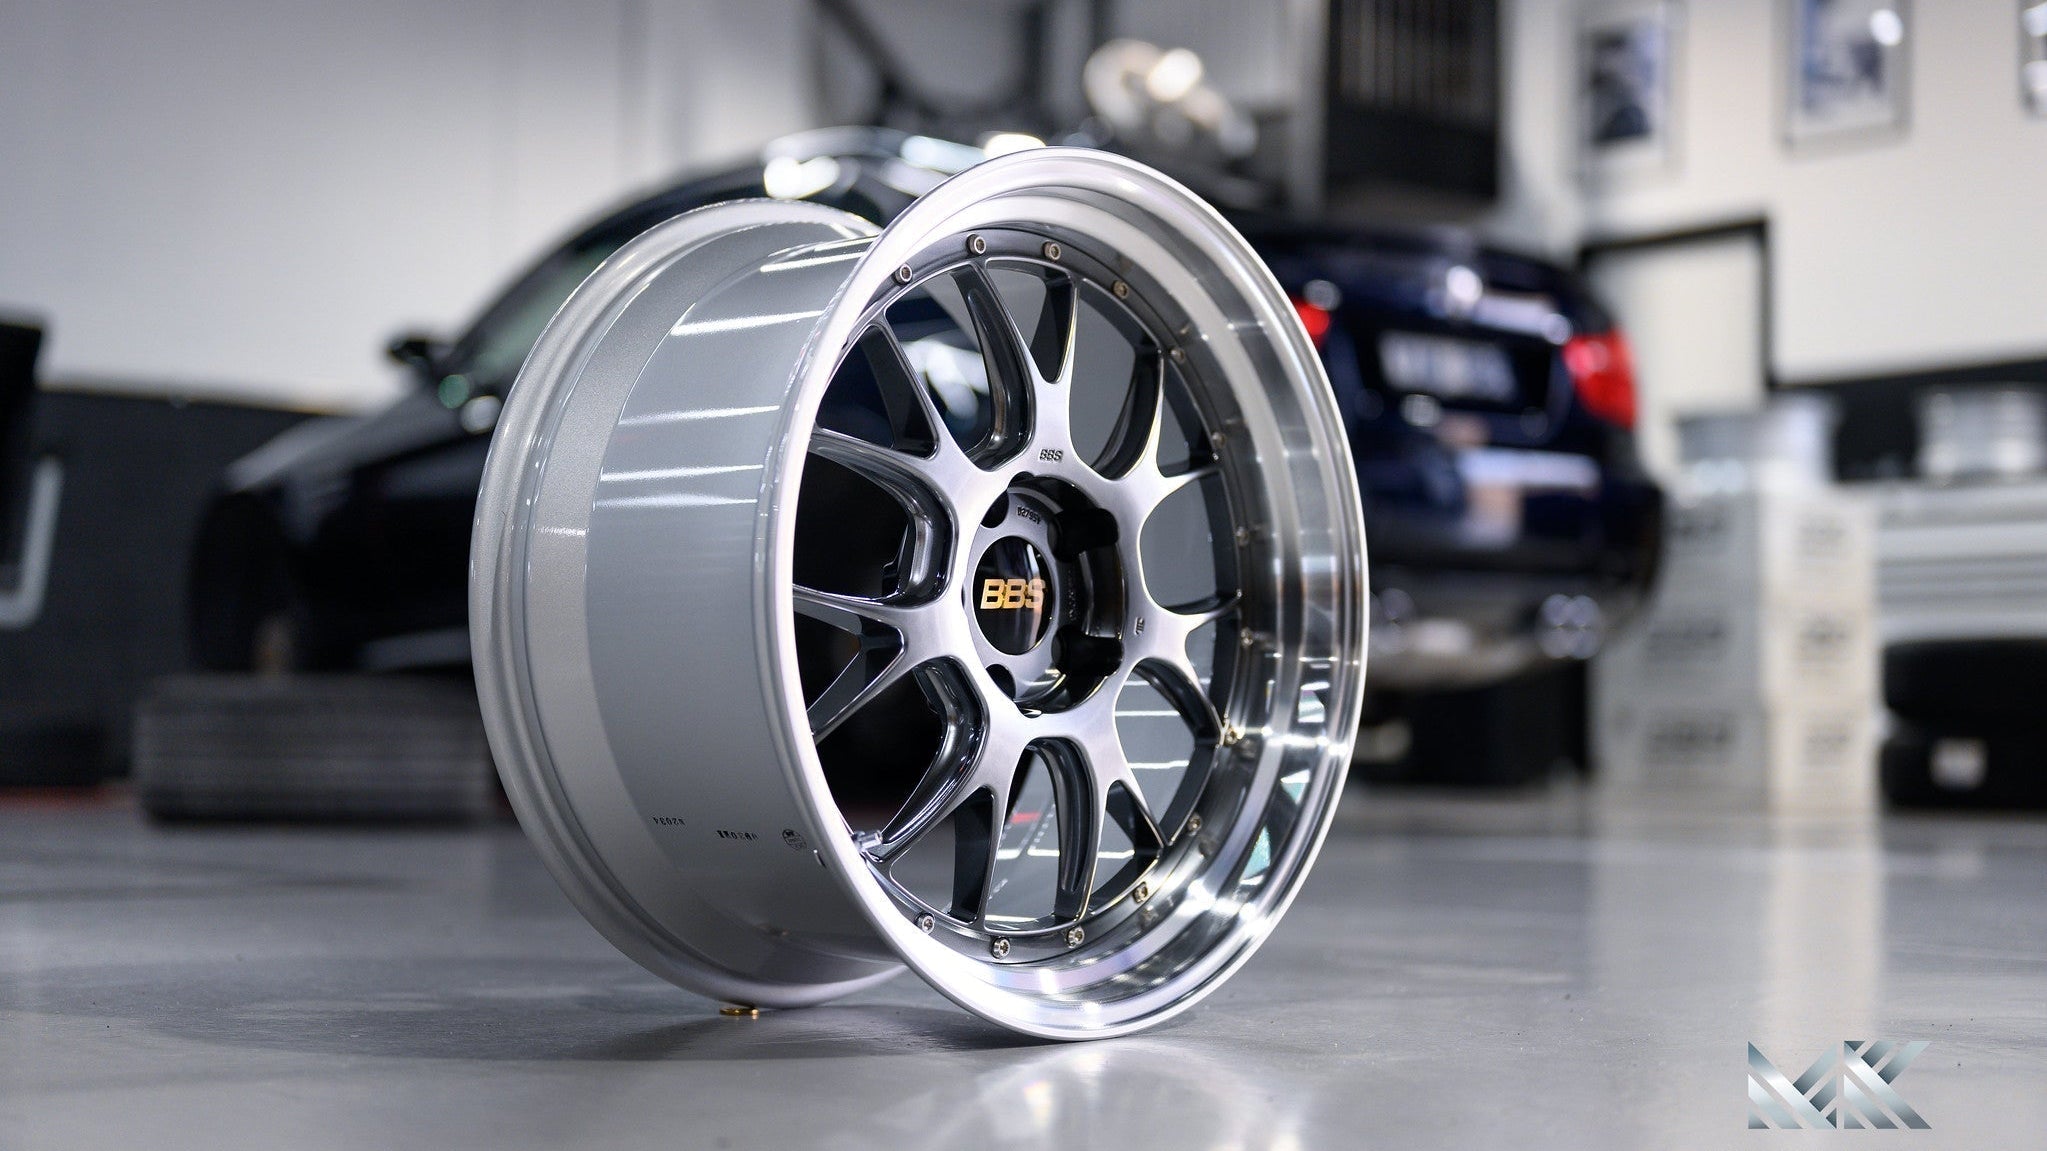 BBS LM-R for F8x M3/M4 - Premium Wheels from BBS Japan - From just $9190.00! Shop now at MK MOTORSPORTS